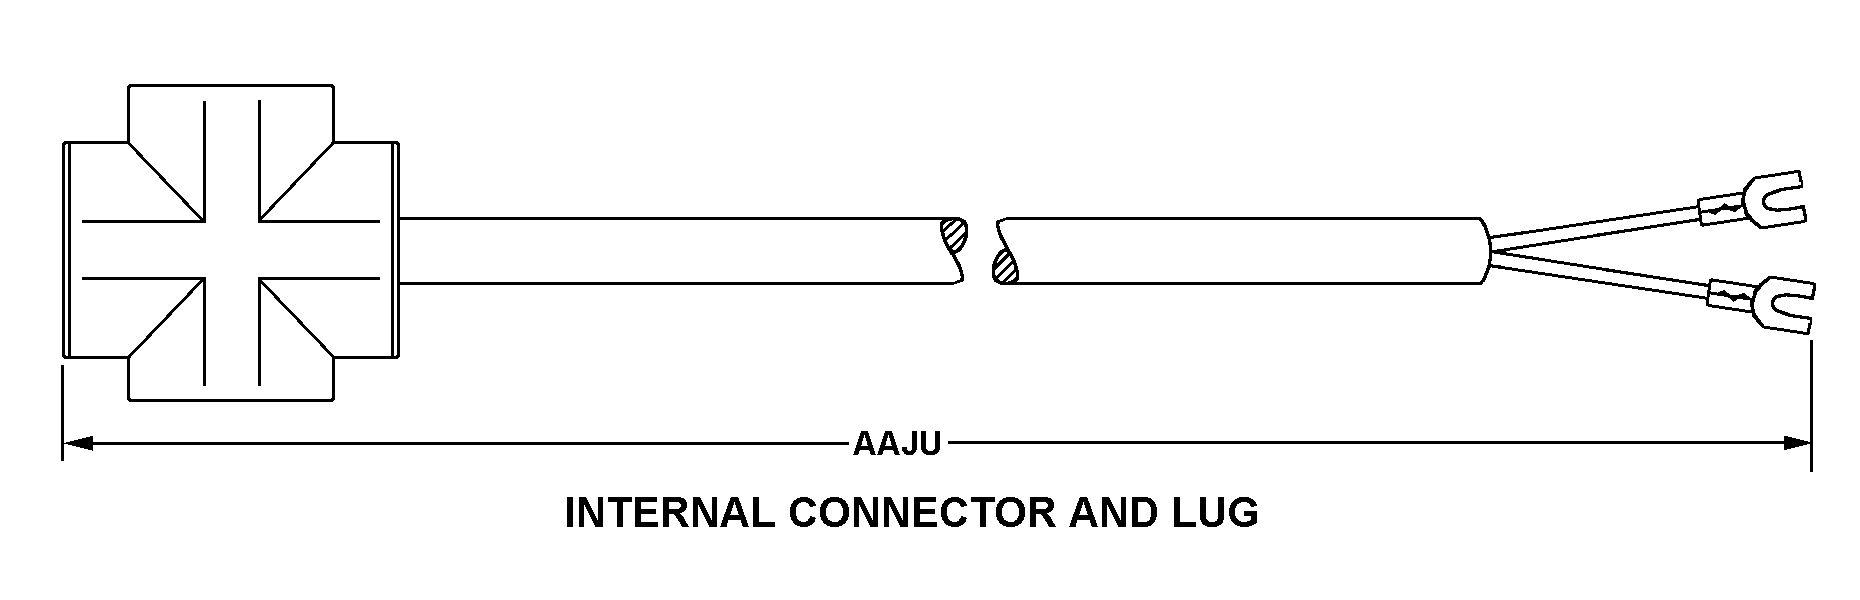 INTERNAL CONNECTOR AND LUG style nsn 6150-01-283-8973